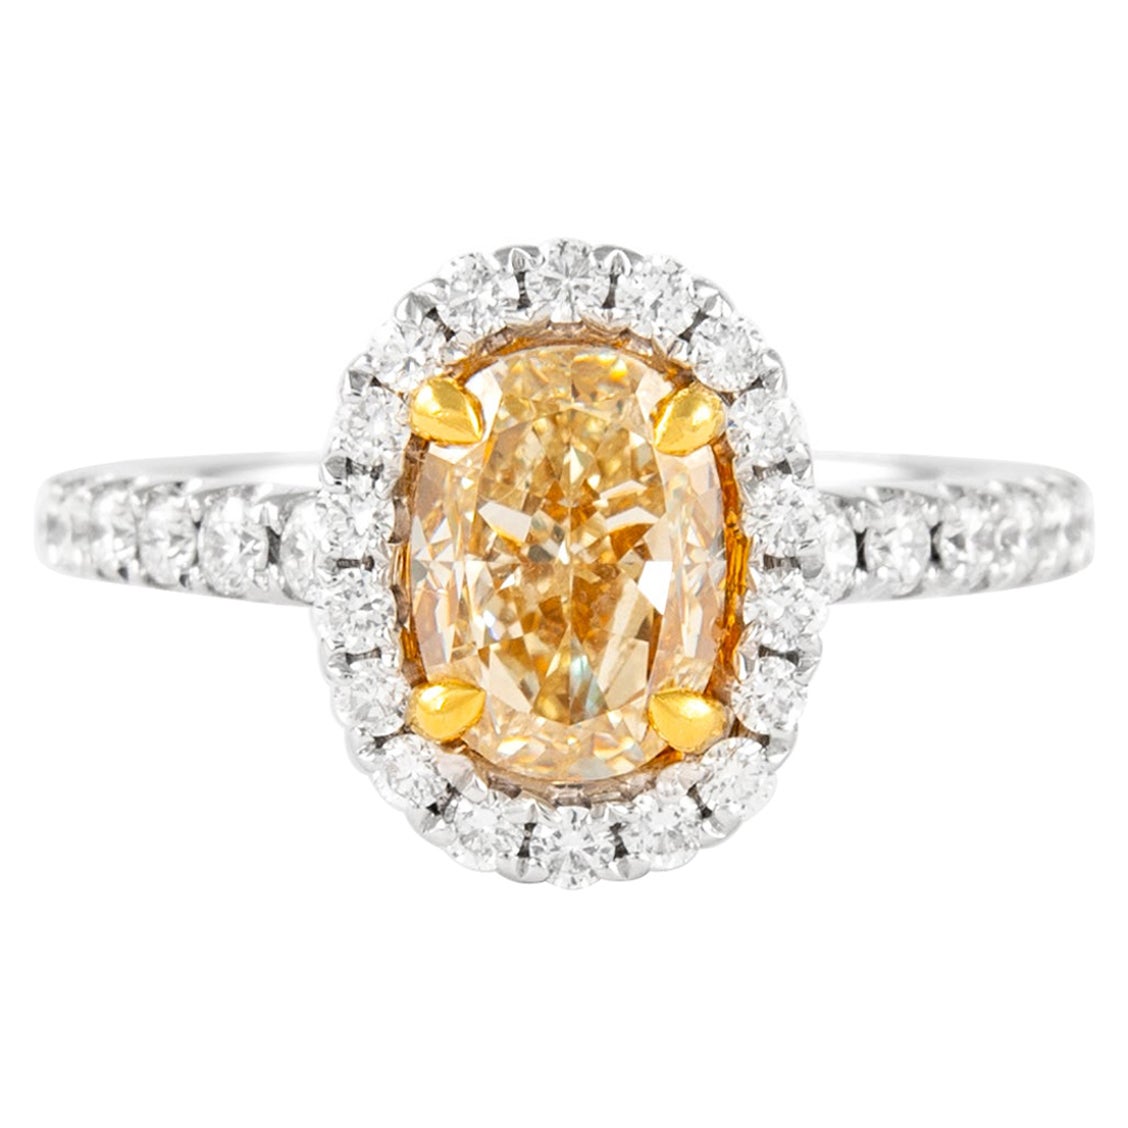 Alexander 2.66ctt Fancy Yellow Oval Diamond with Halo Ring 18k Two Tone For Sale